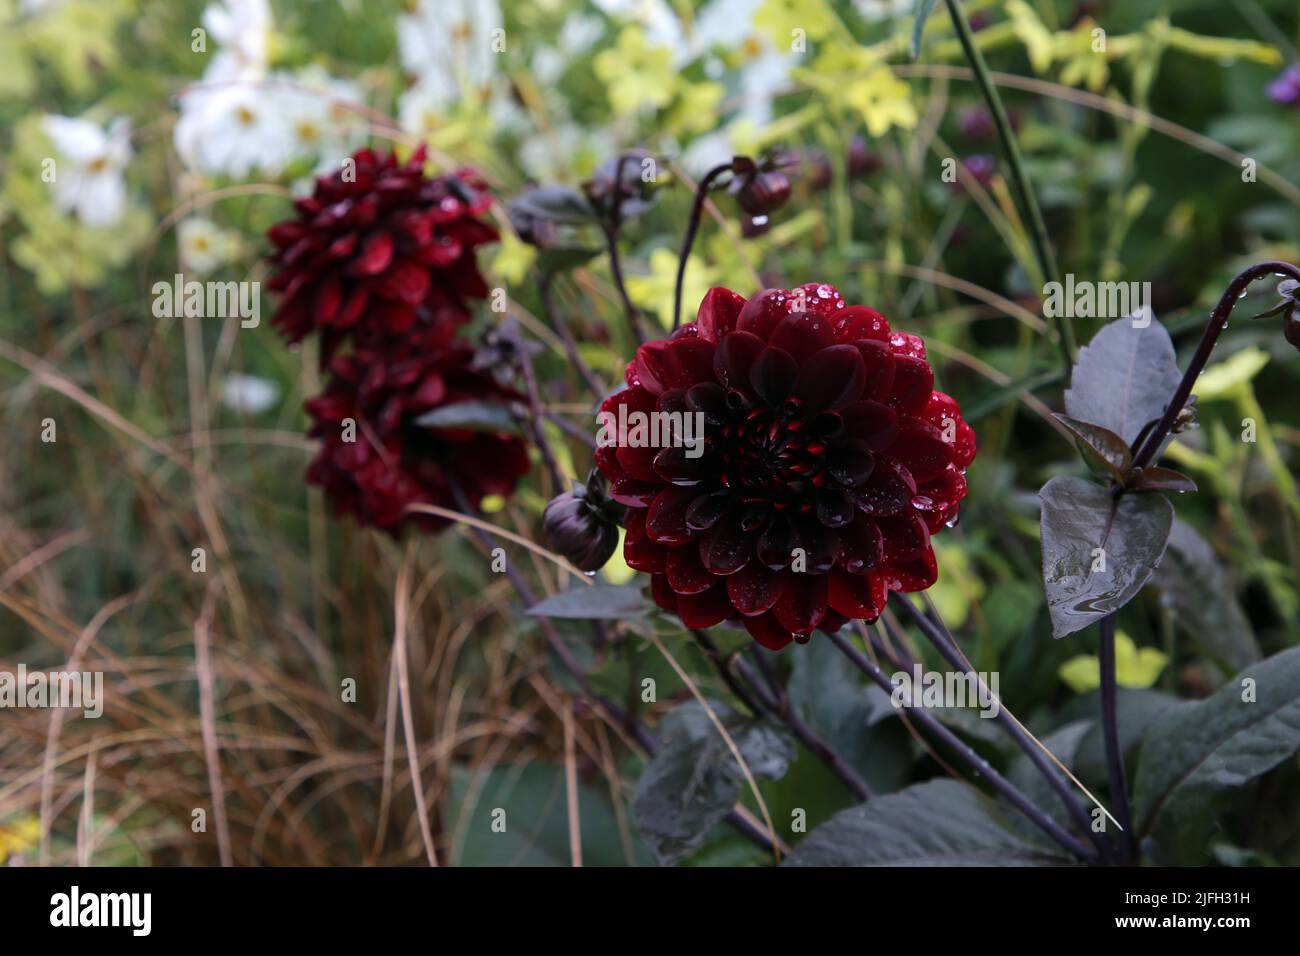 Red chrysanthemum aka Dahlia flowers with green leaves photographed in a garden in Helsinki, Finland during a sunny fall day. Closeup color image. Stock Photo